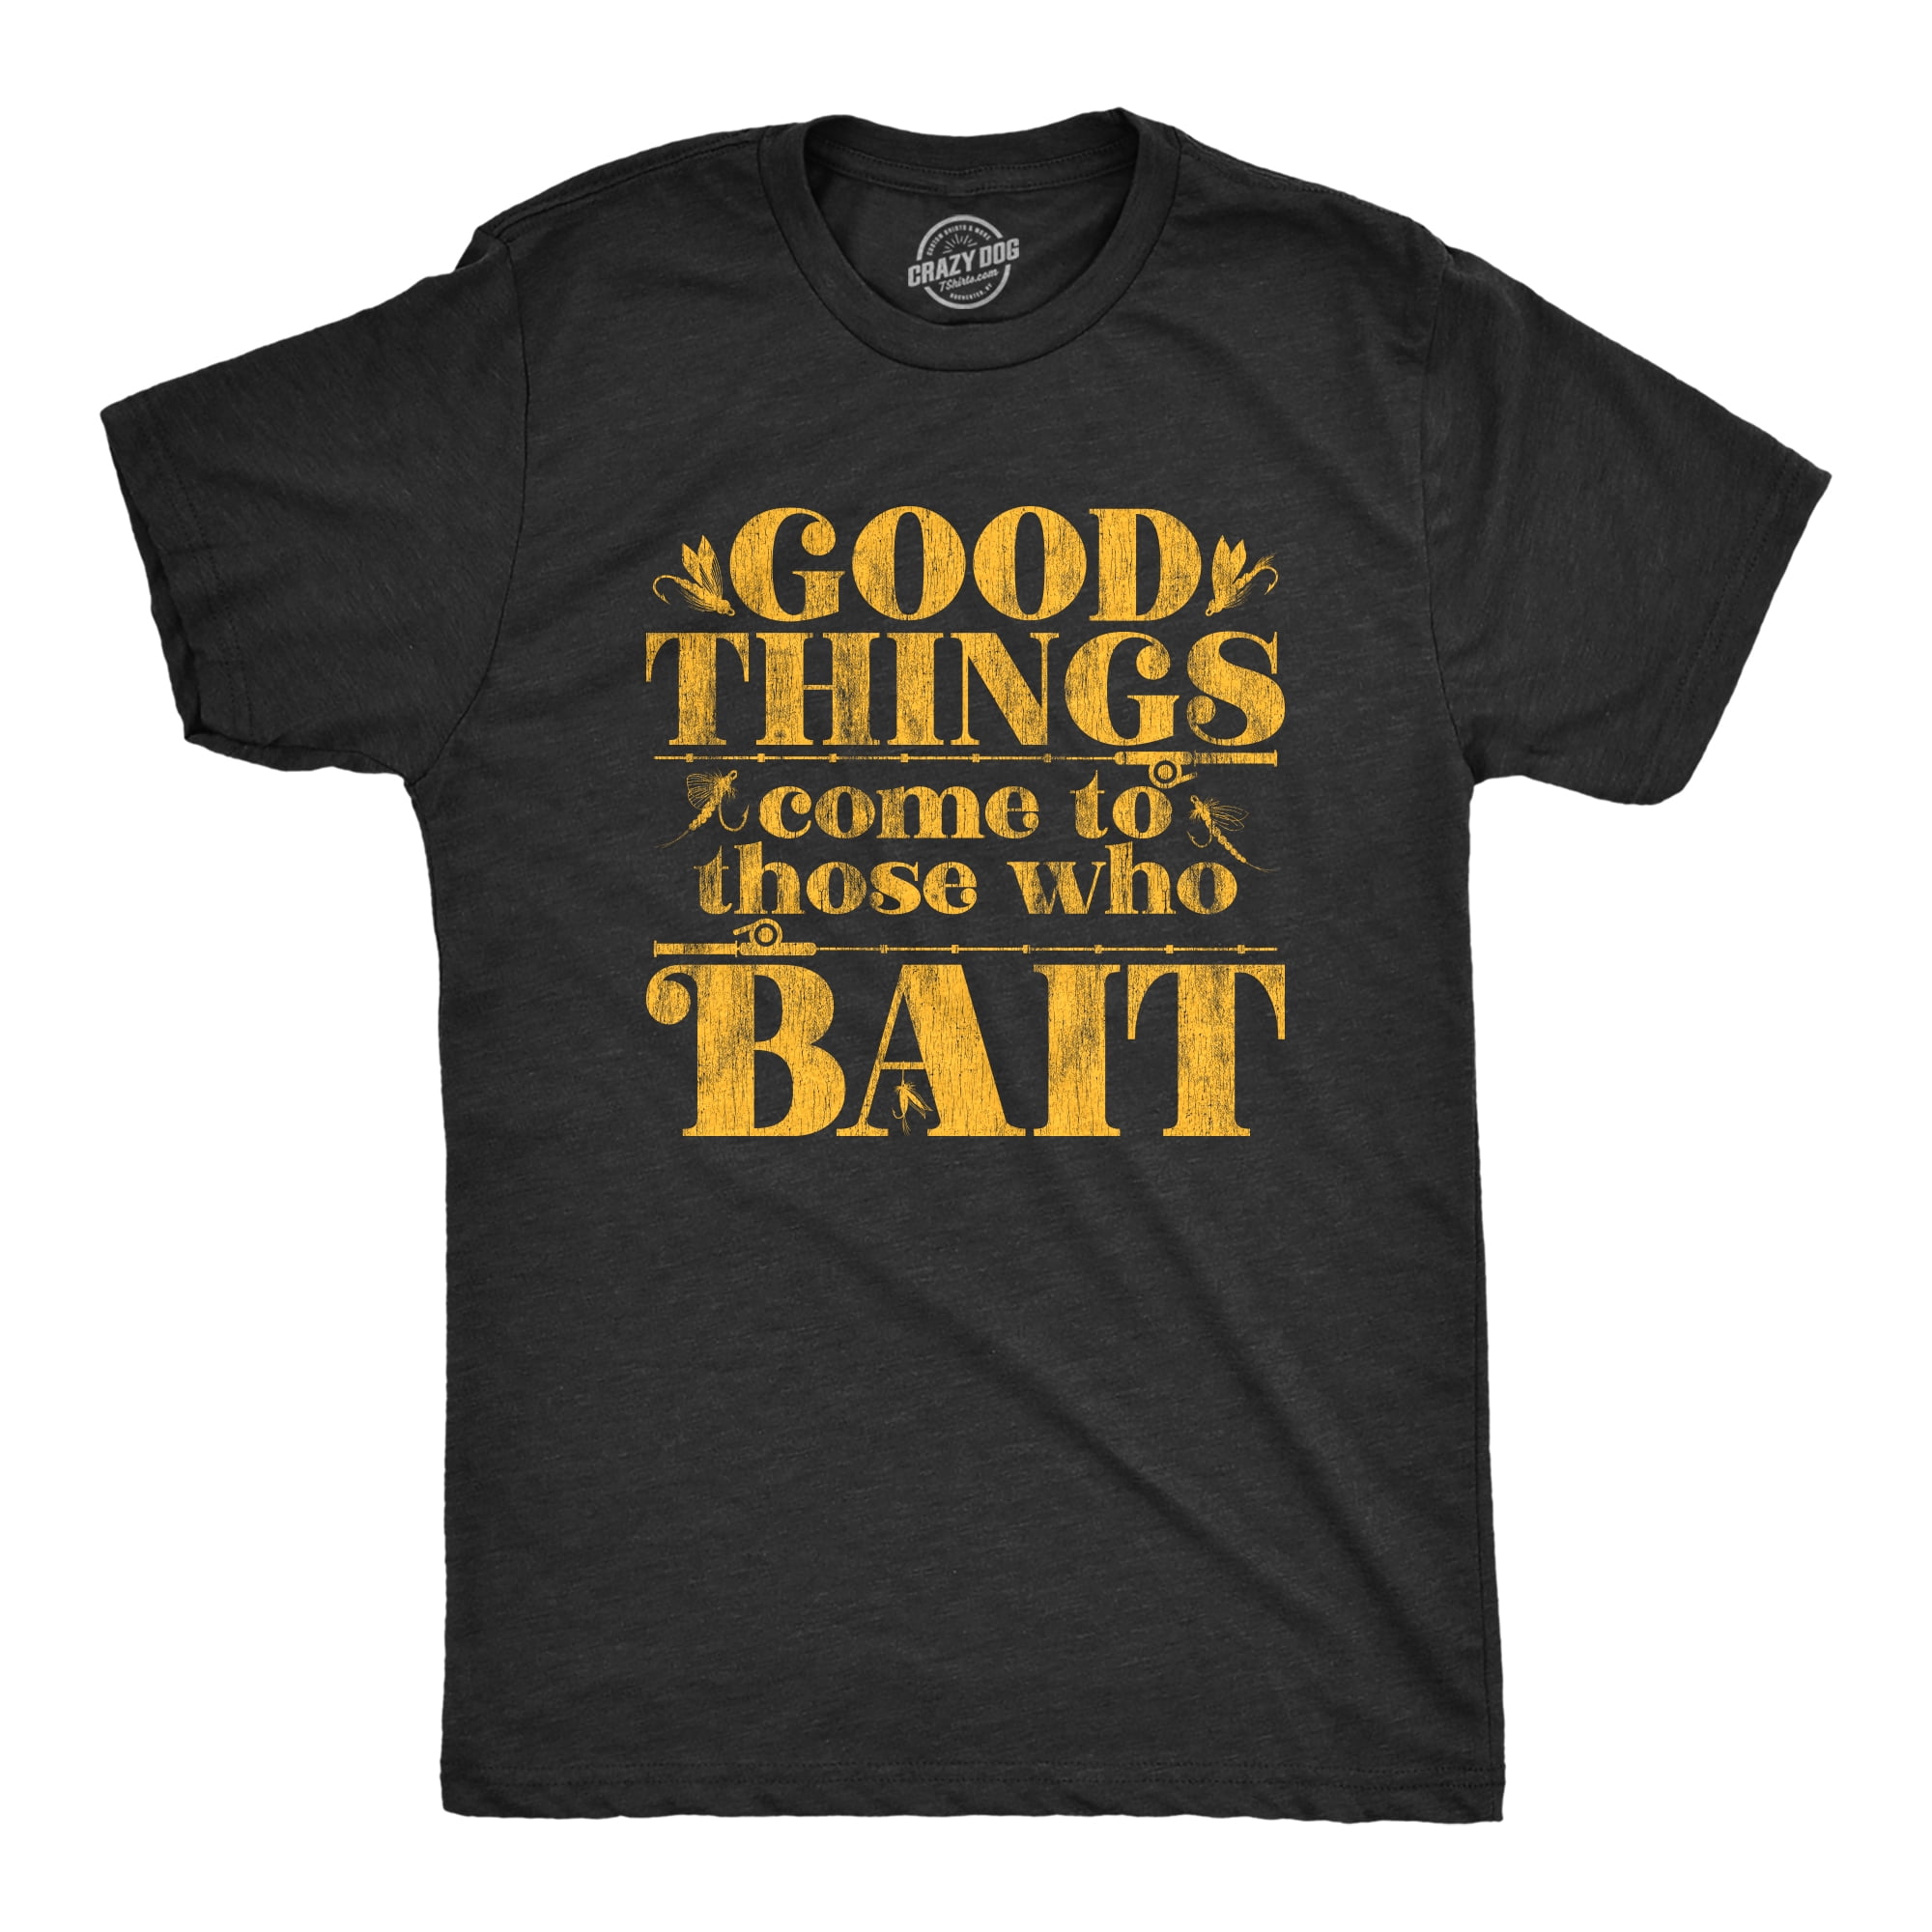 Mens Good Things Come To Those Who Bait Tshirt Funny Fishing Graphic  Novelty Tee Graphic Tees 